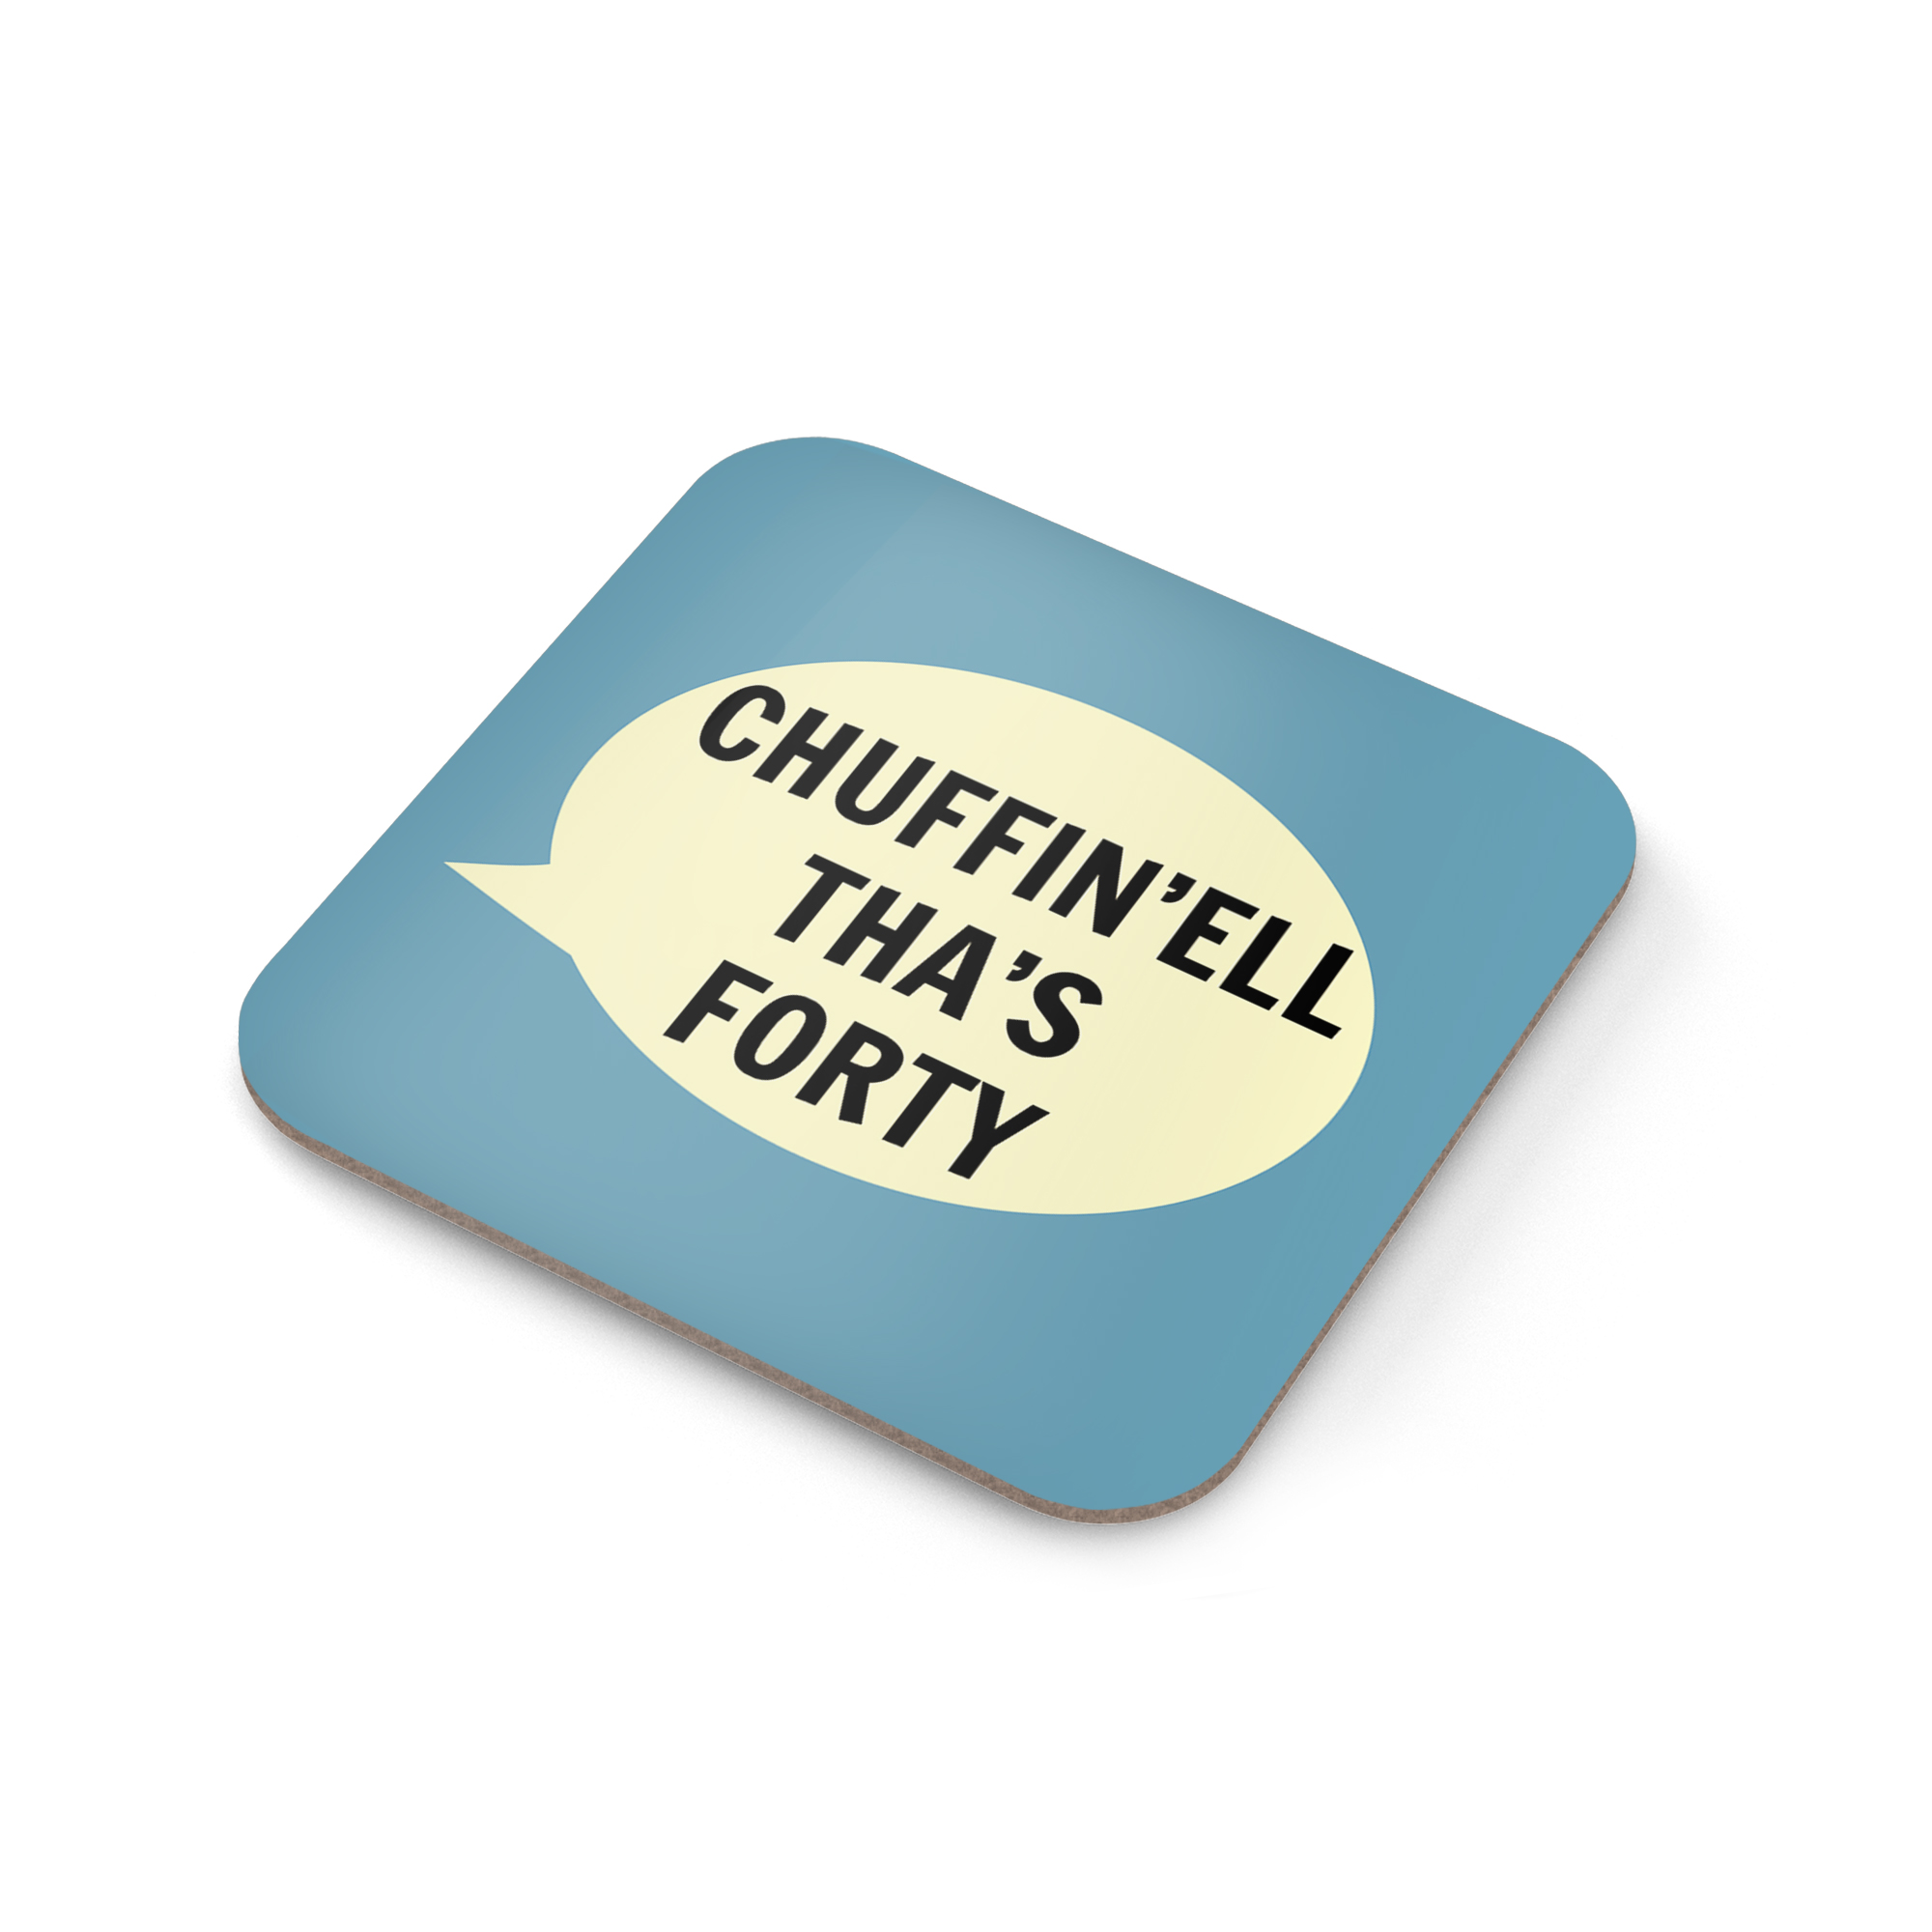 funny coasters Chuffin Ell Yorkshire themed table coasters 